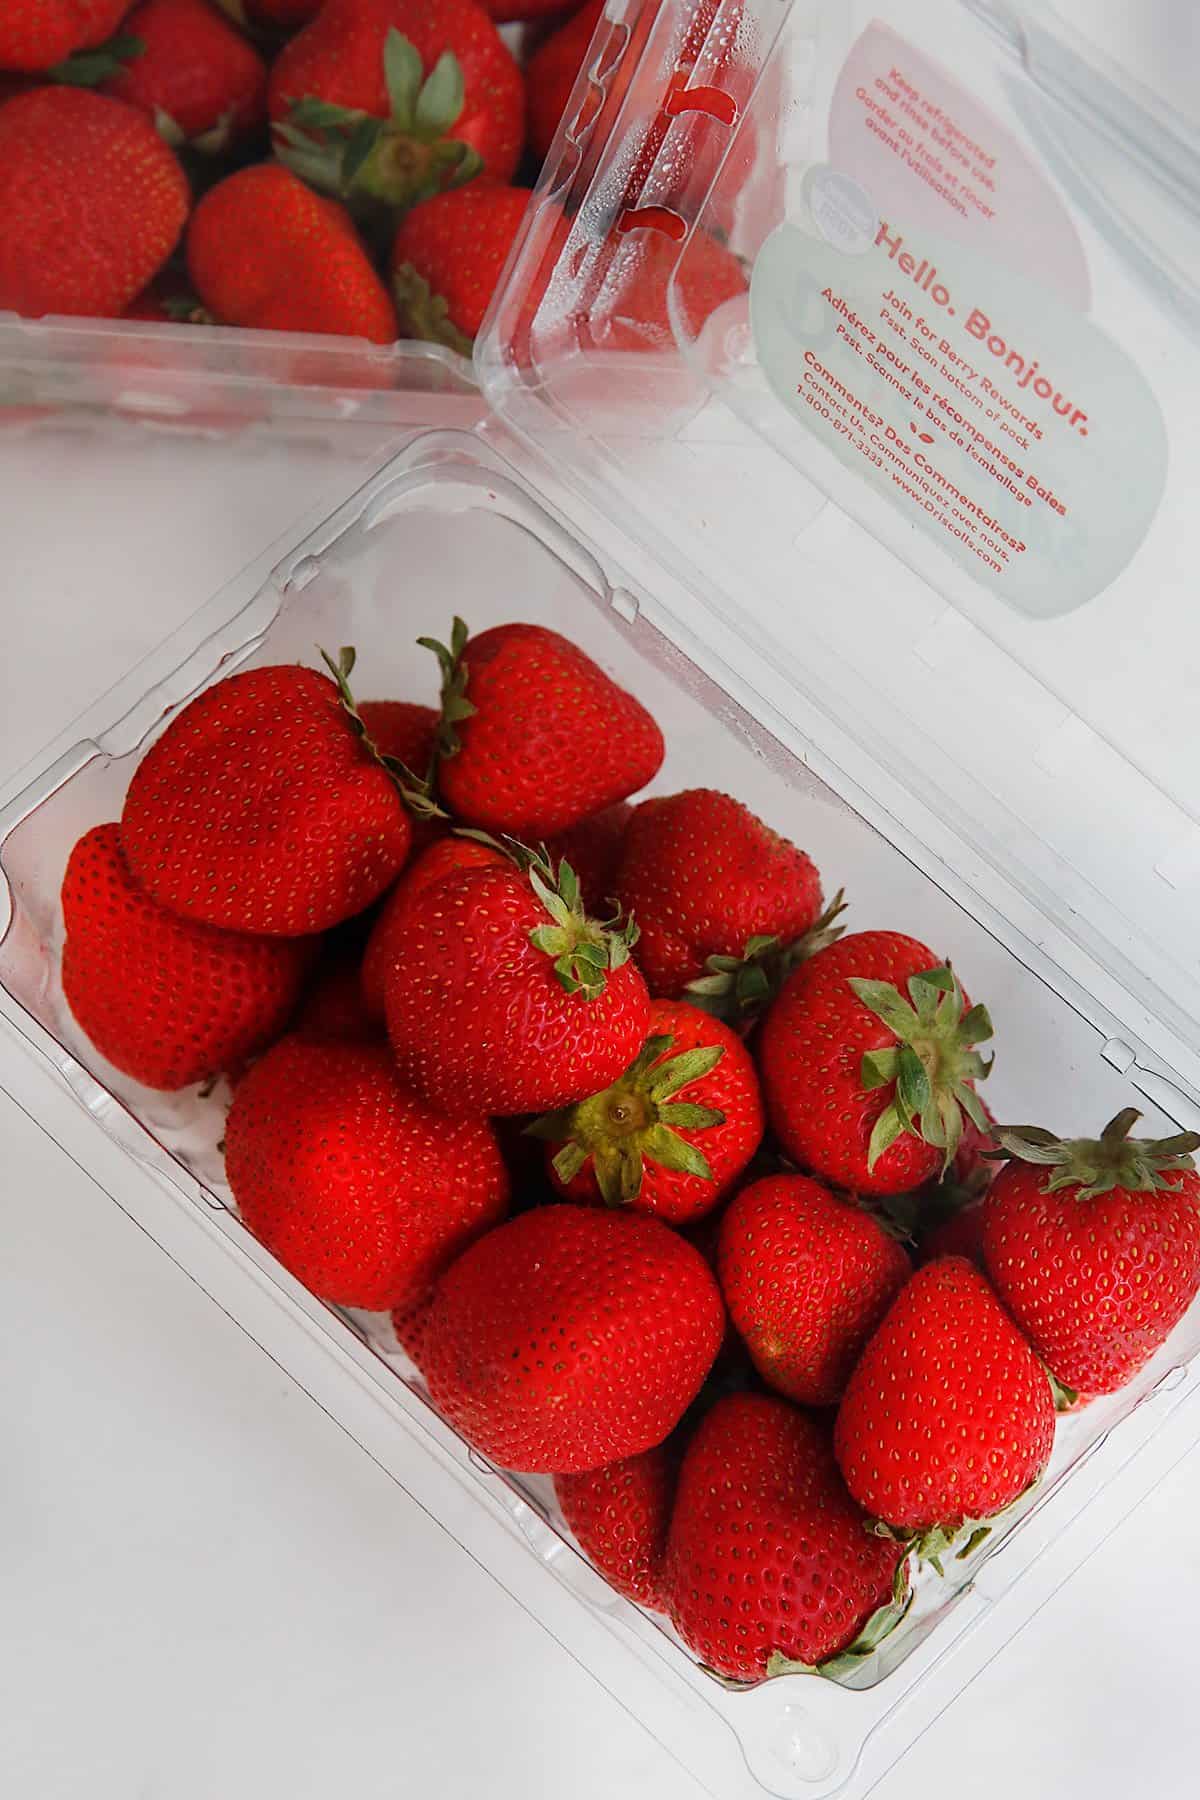 How To Clean Strawberries1 